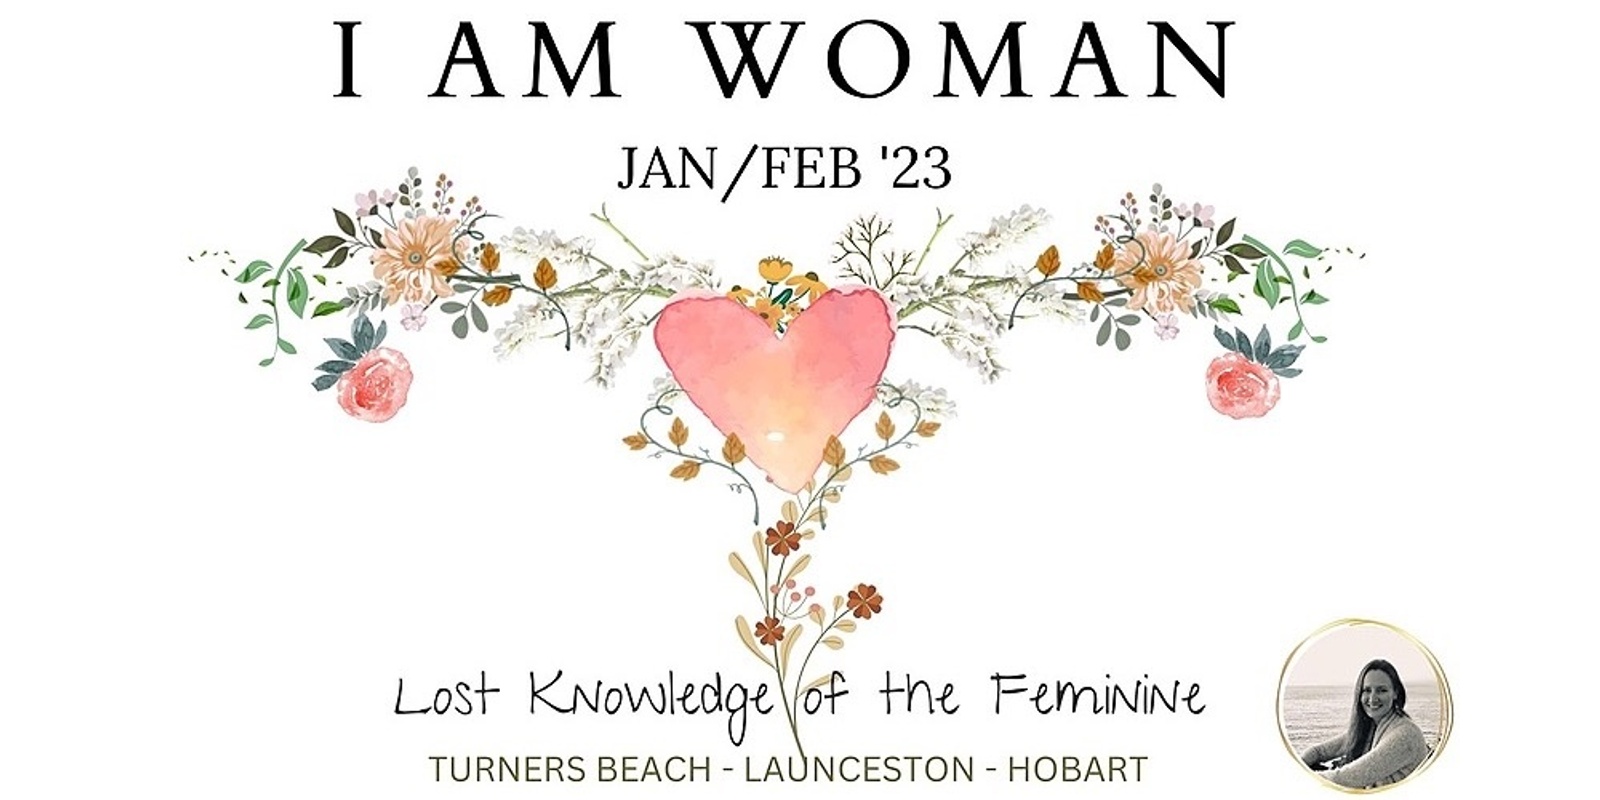 Banner image for I AM WOMAN - Hobart